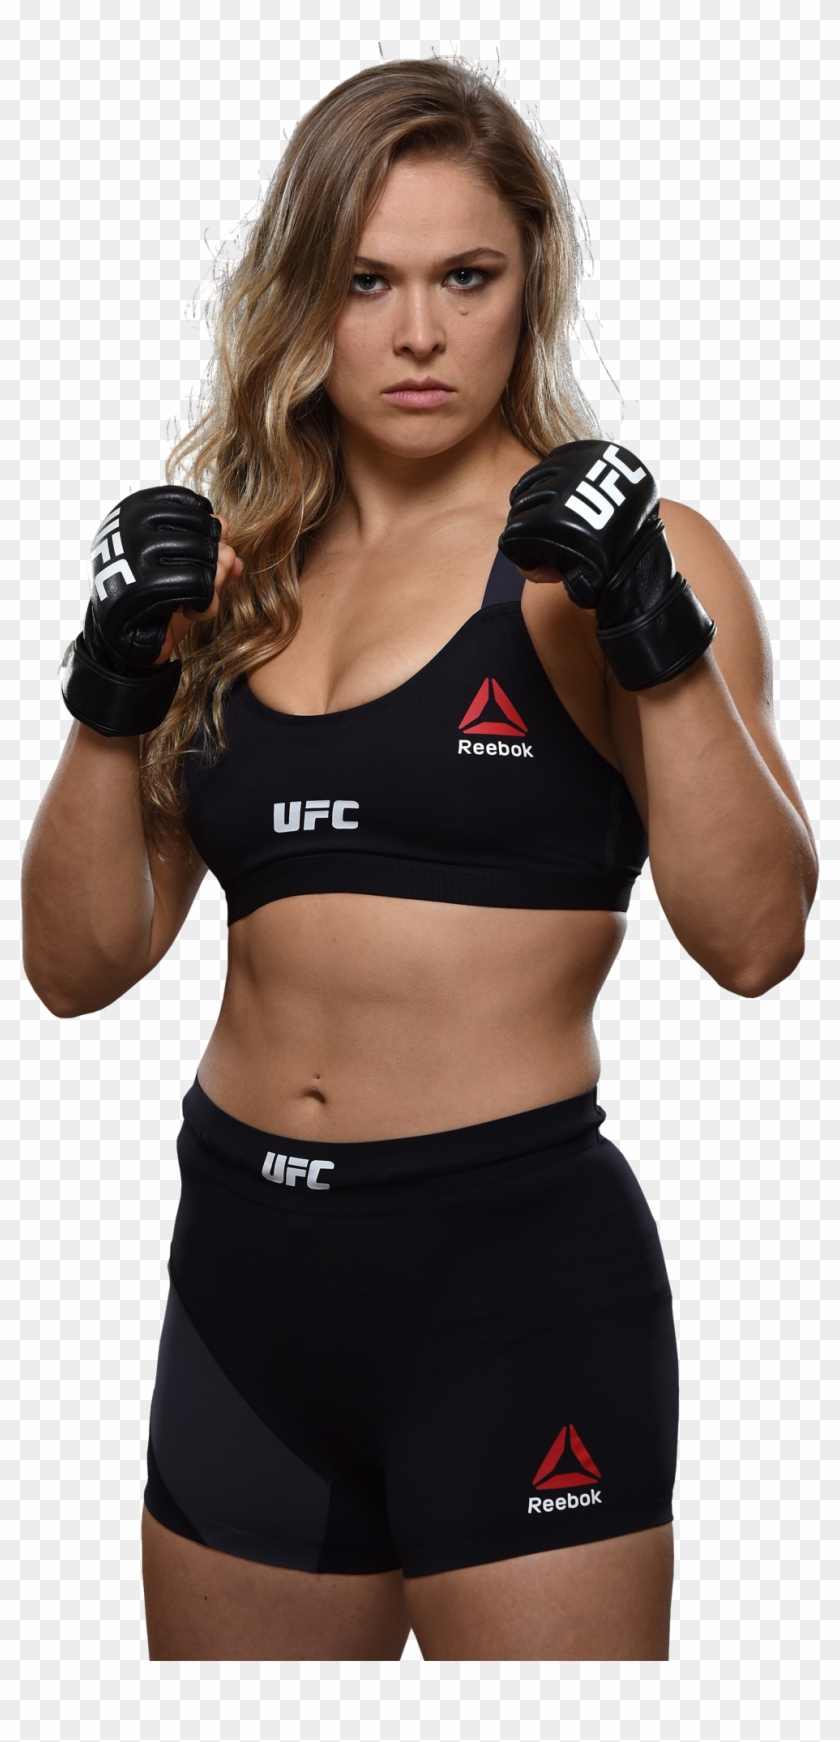 Ronda Rousey Png Transparent Image - Wwe Ronda Rousey Ufc Clipart #1555959